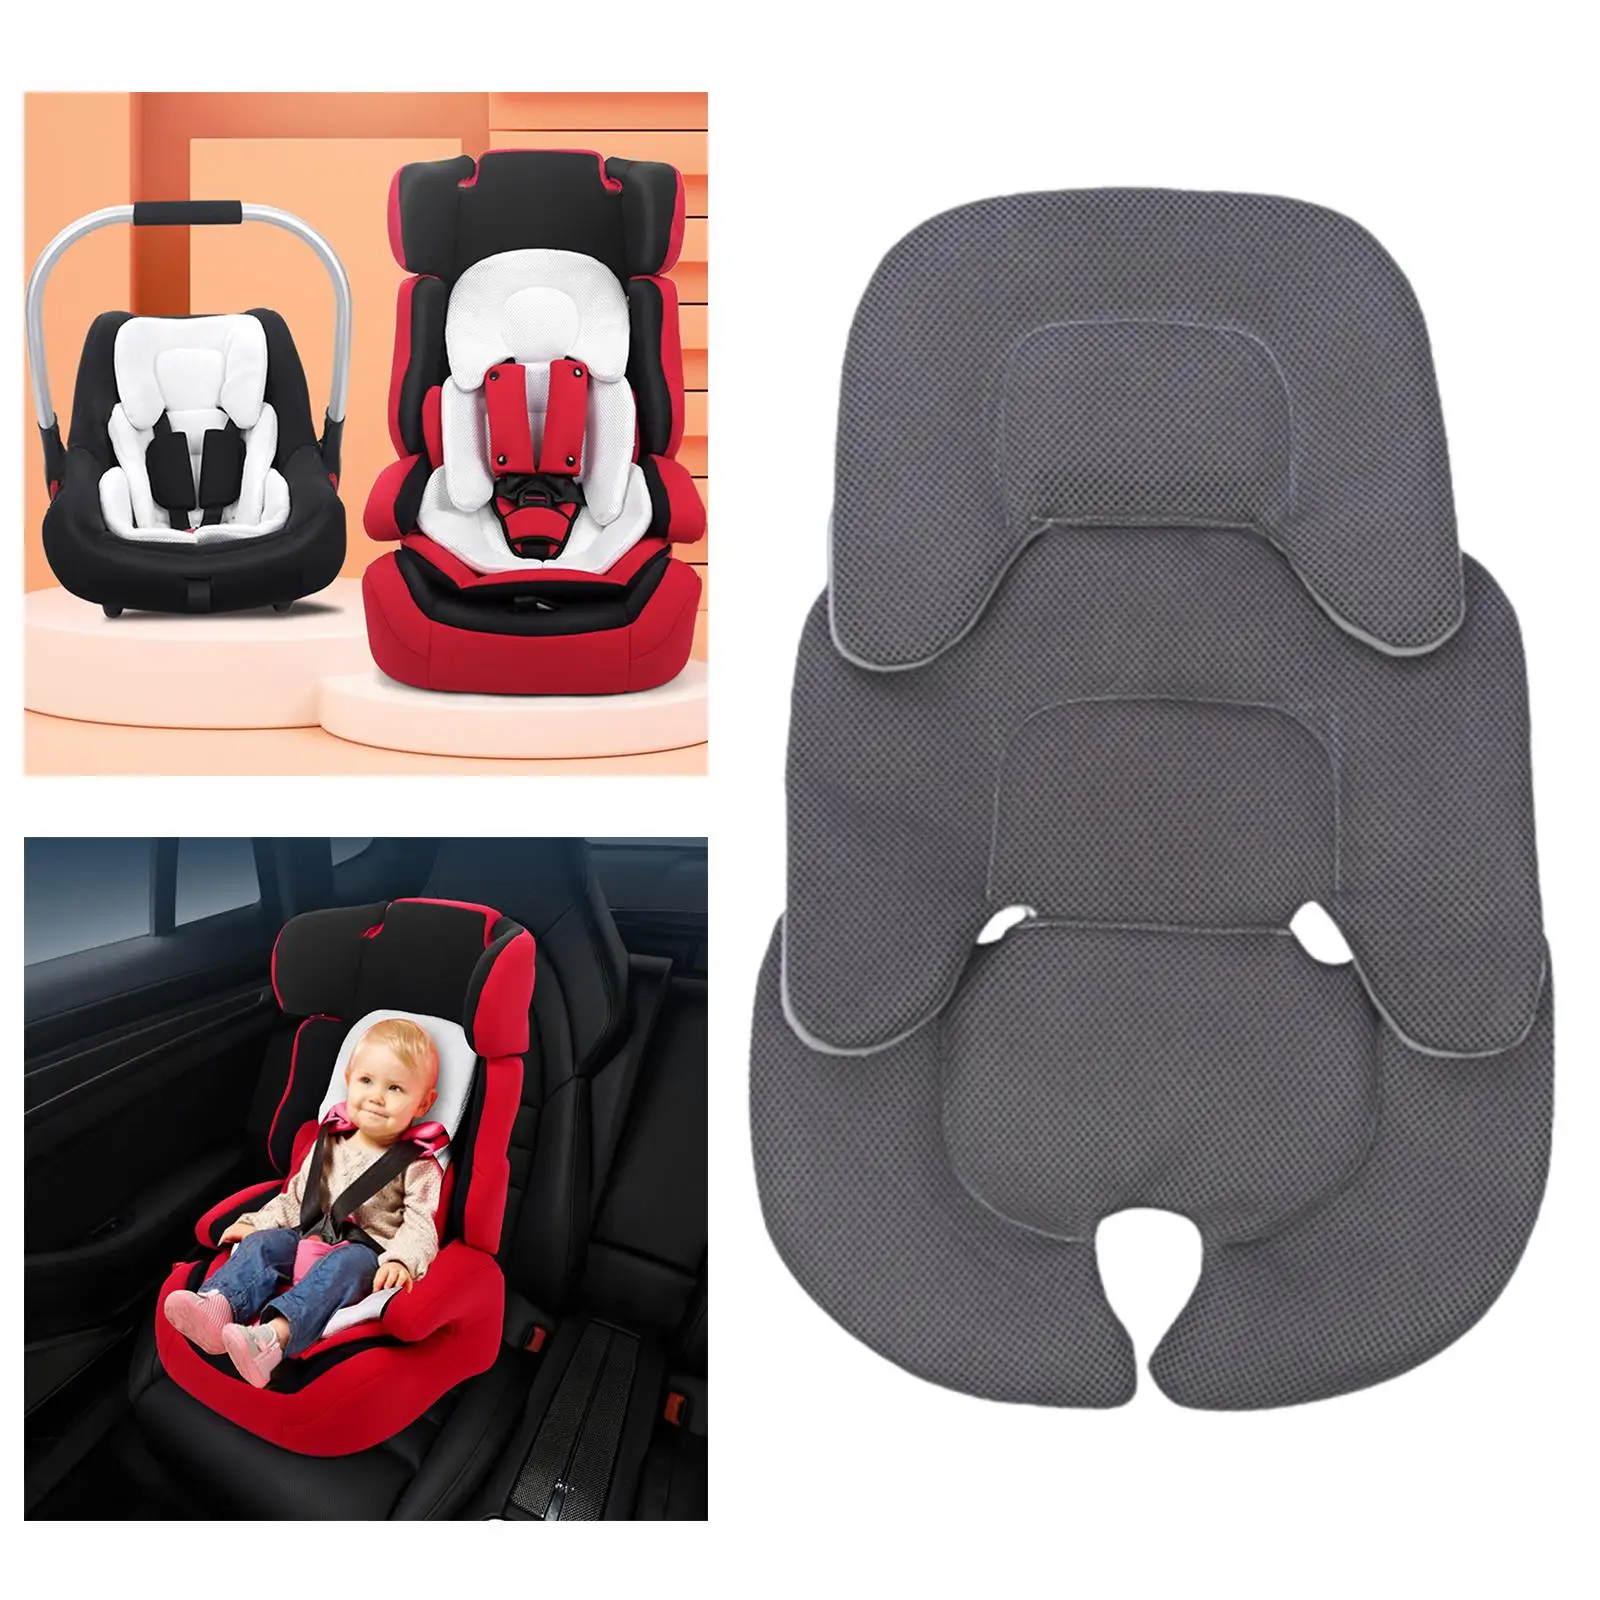 baby stroller accessories box Baby Stroller Cushion Head and Body Support Pillow Car Seat Pad Liner Baby Shower Gifts Car Seat Insert for Baby Newborn Infant baby jogger double stroller accessories	